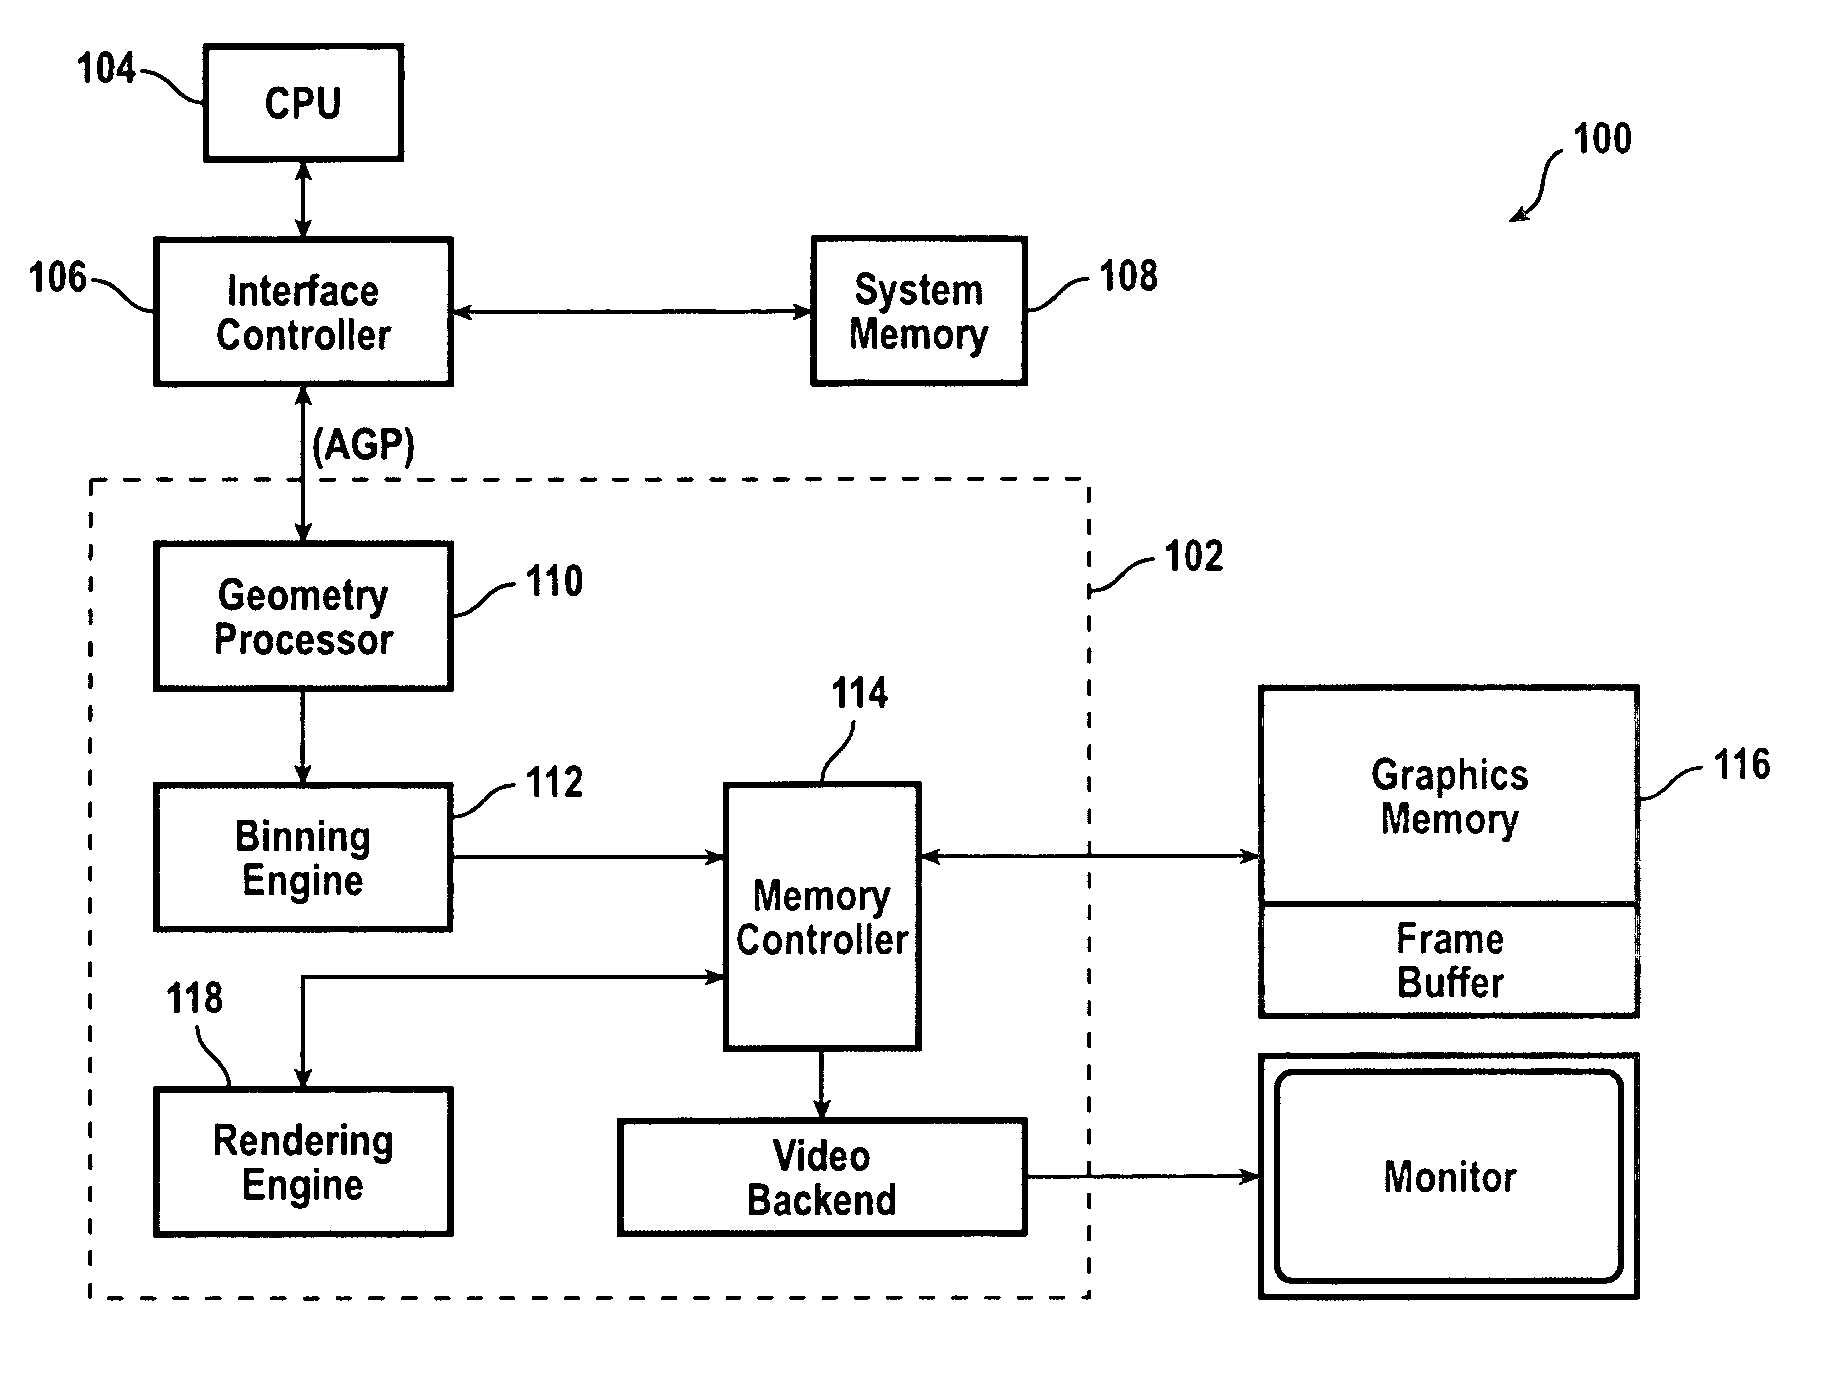 Demand-based memory system for graphics applications